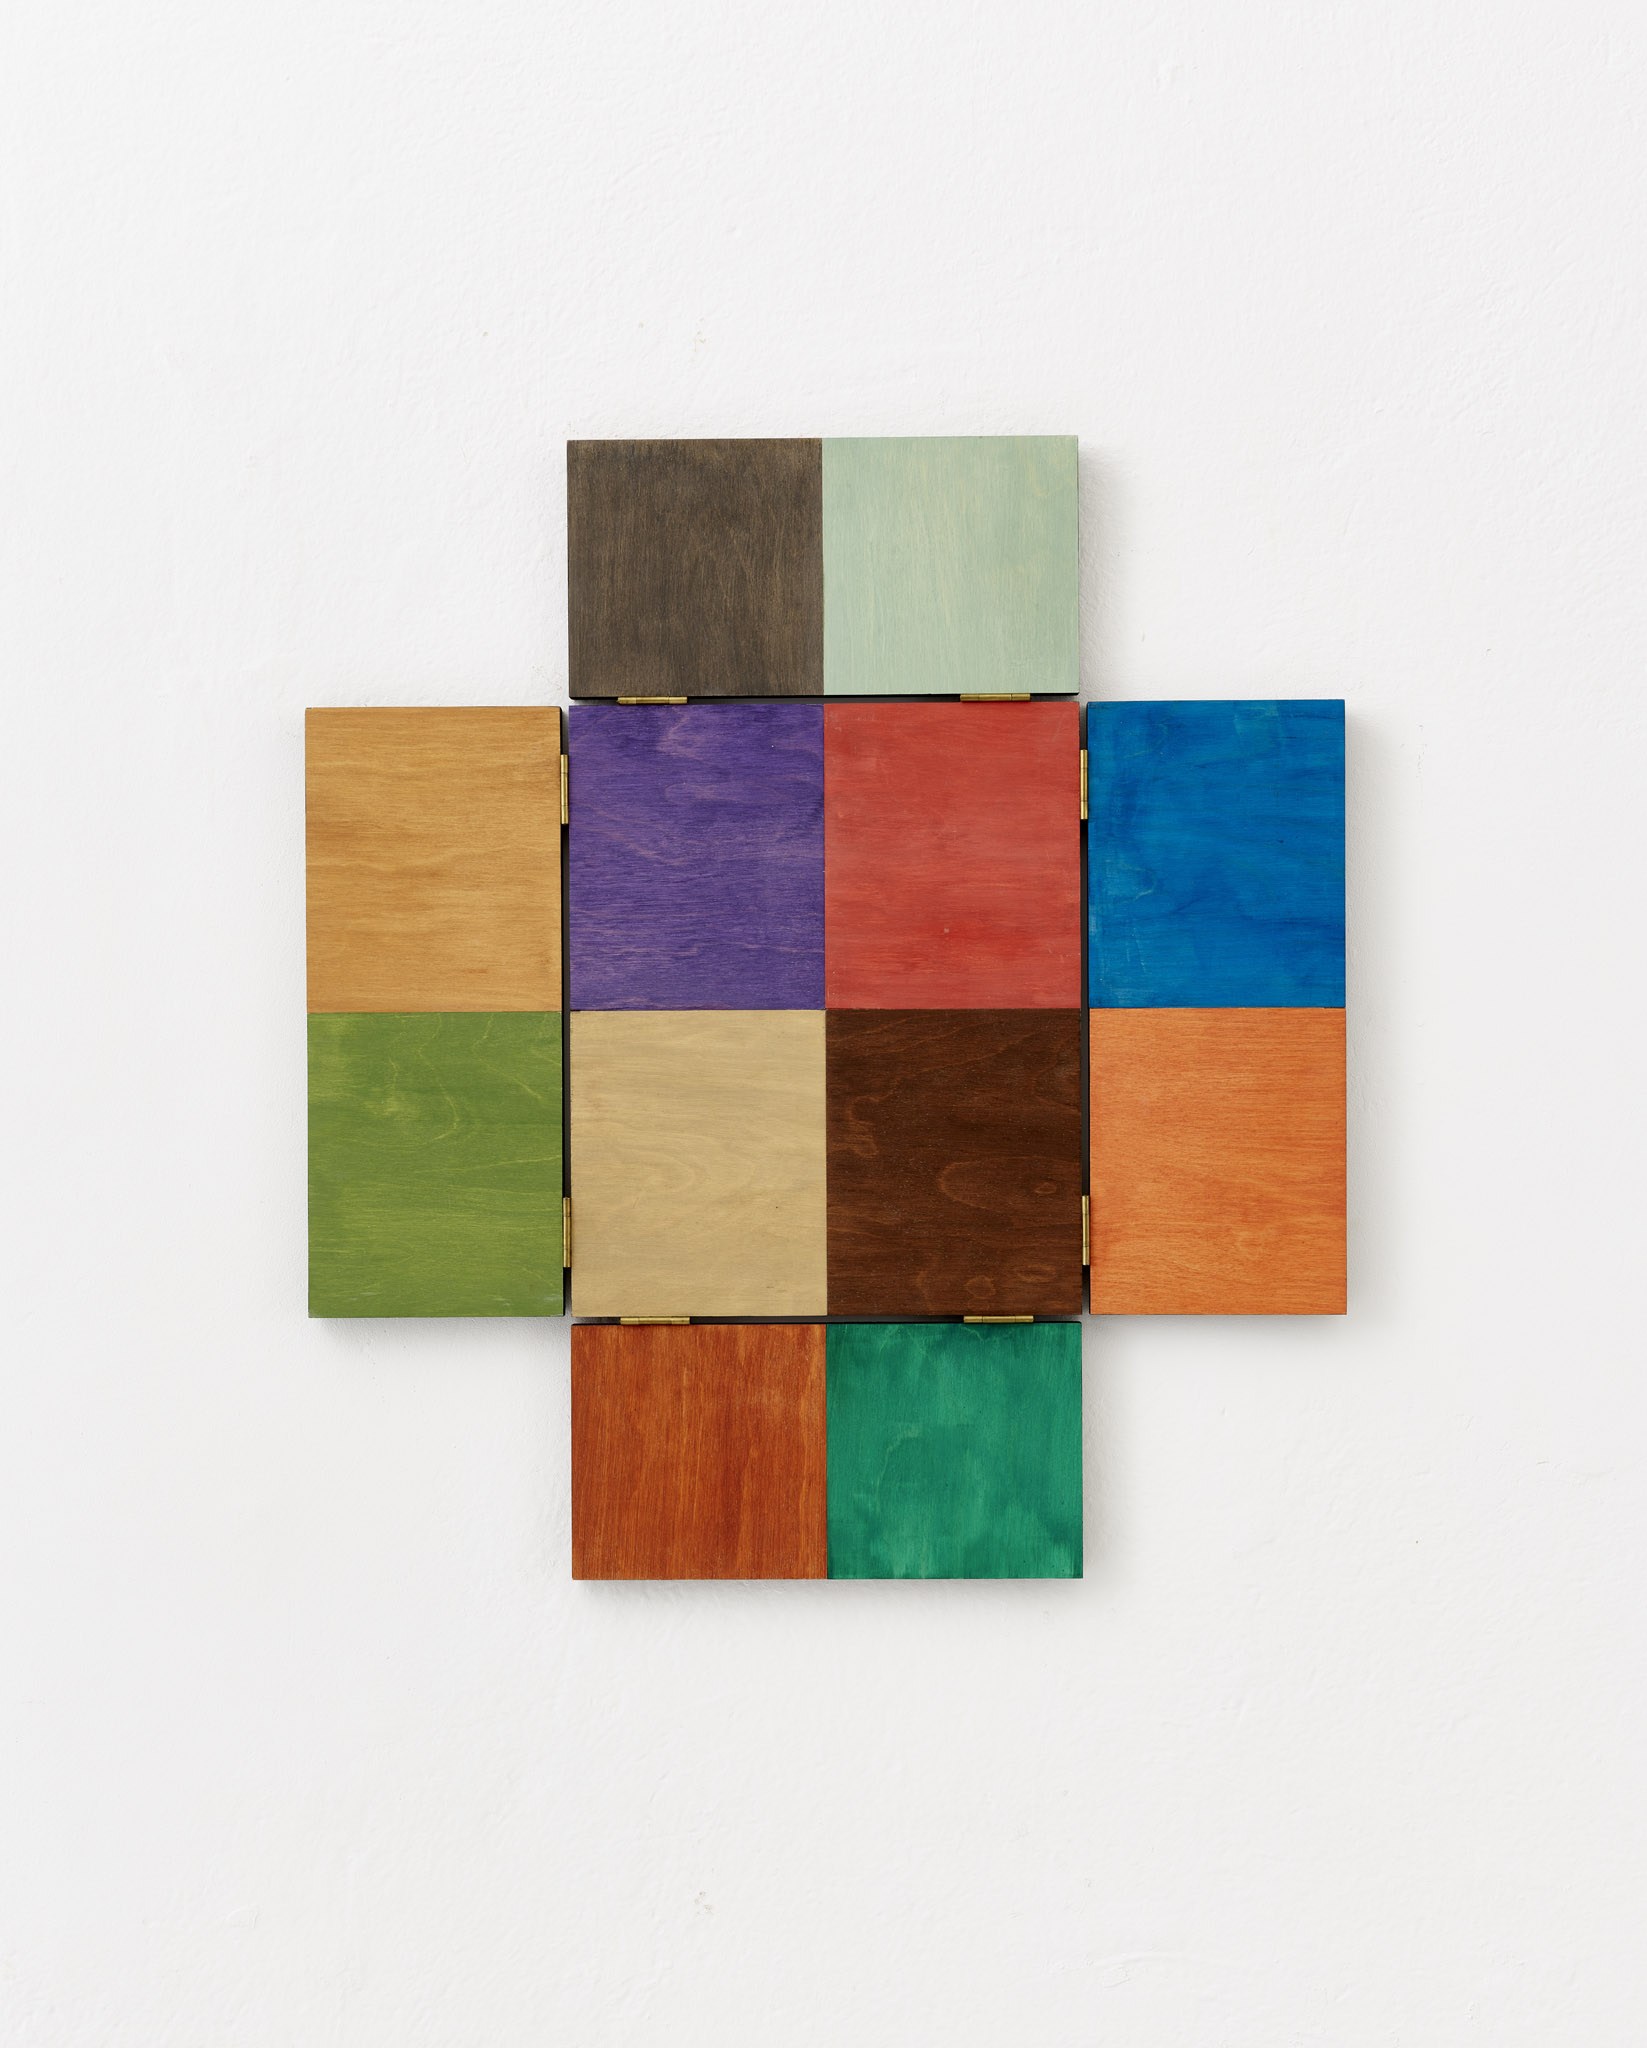 Sunah Choi, "Maquette (Room with painted walls and floor)", 2023, wood, color, brass, 60 x 60 x 2 cm